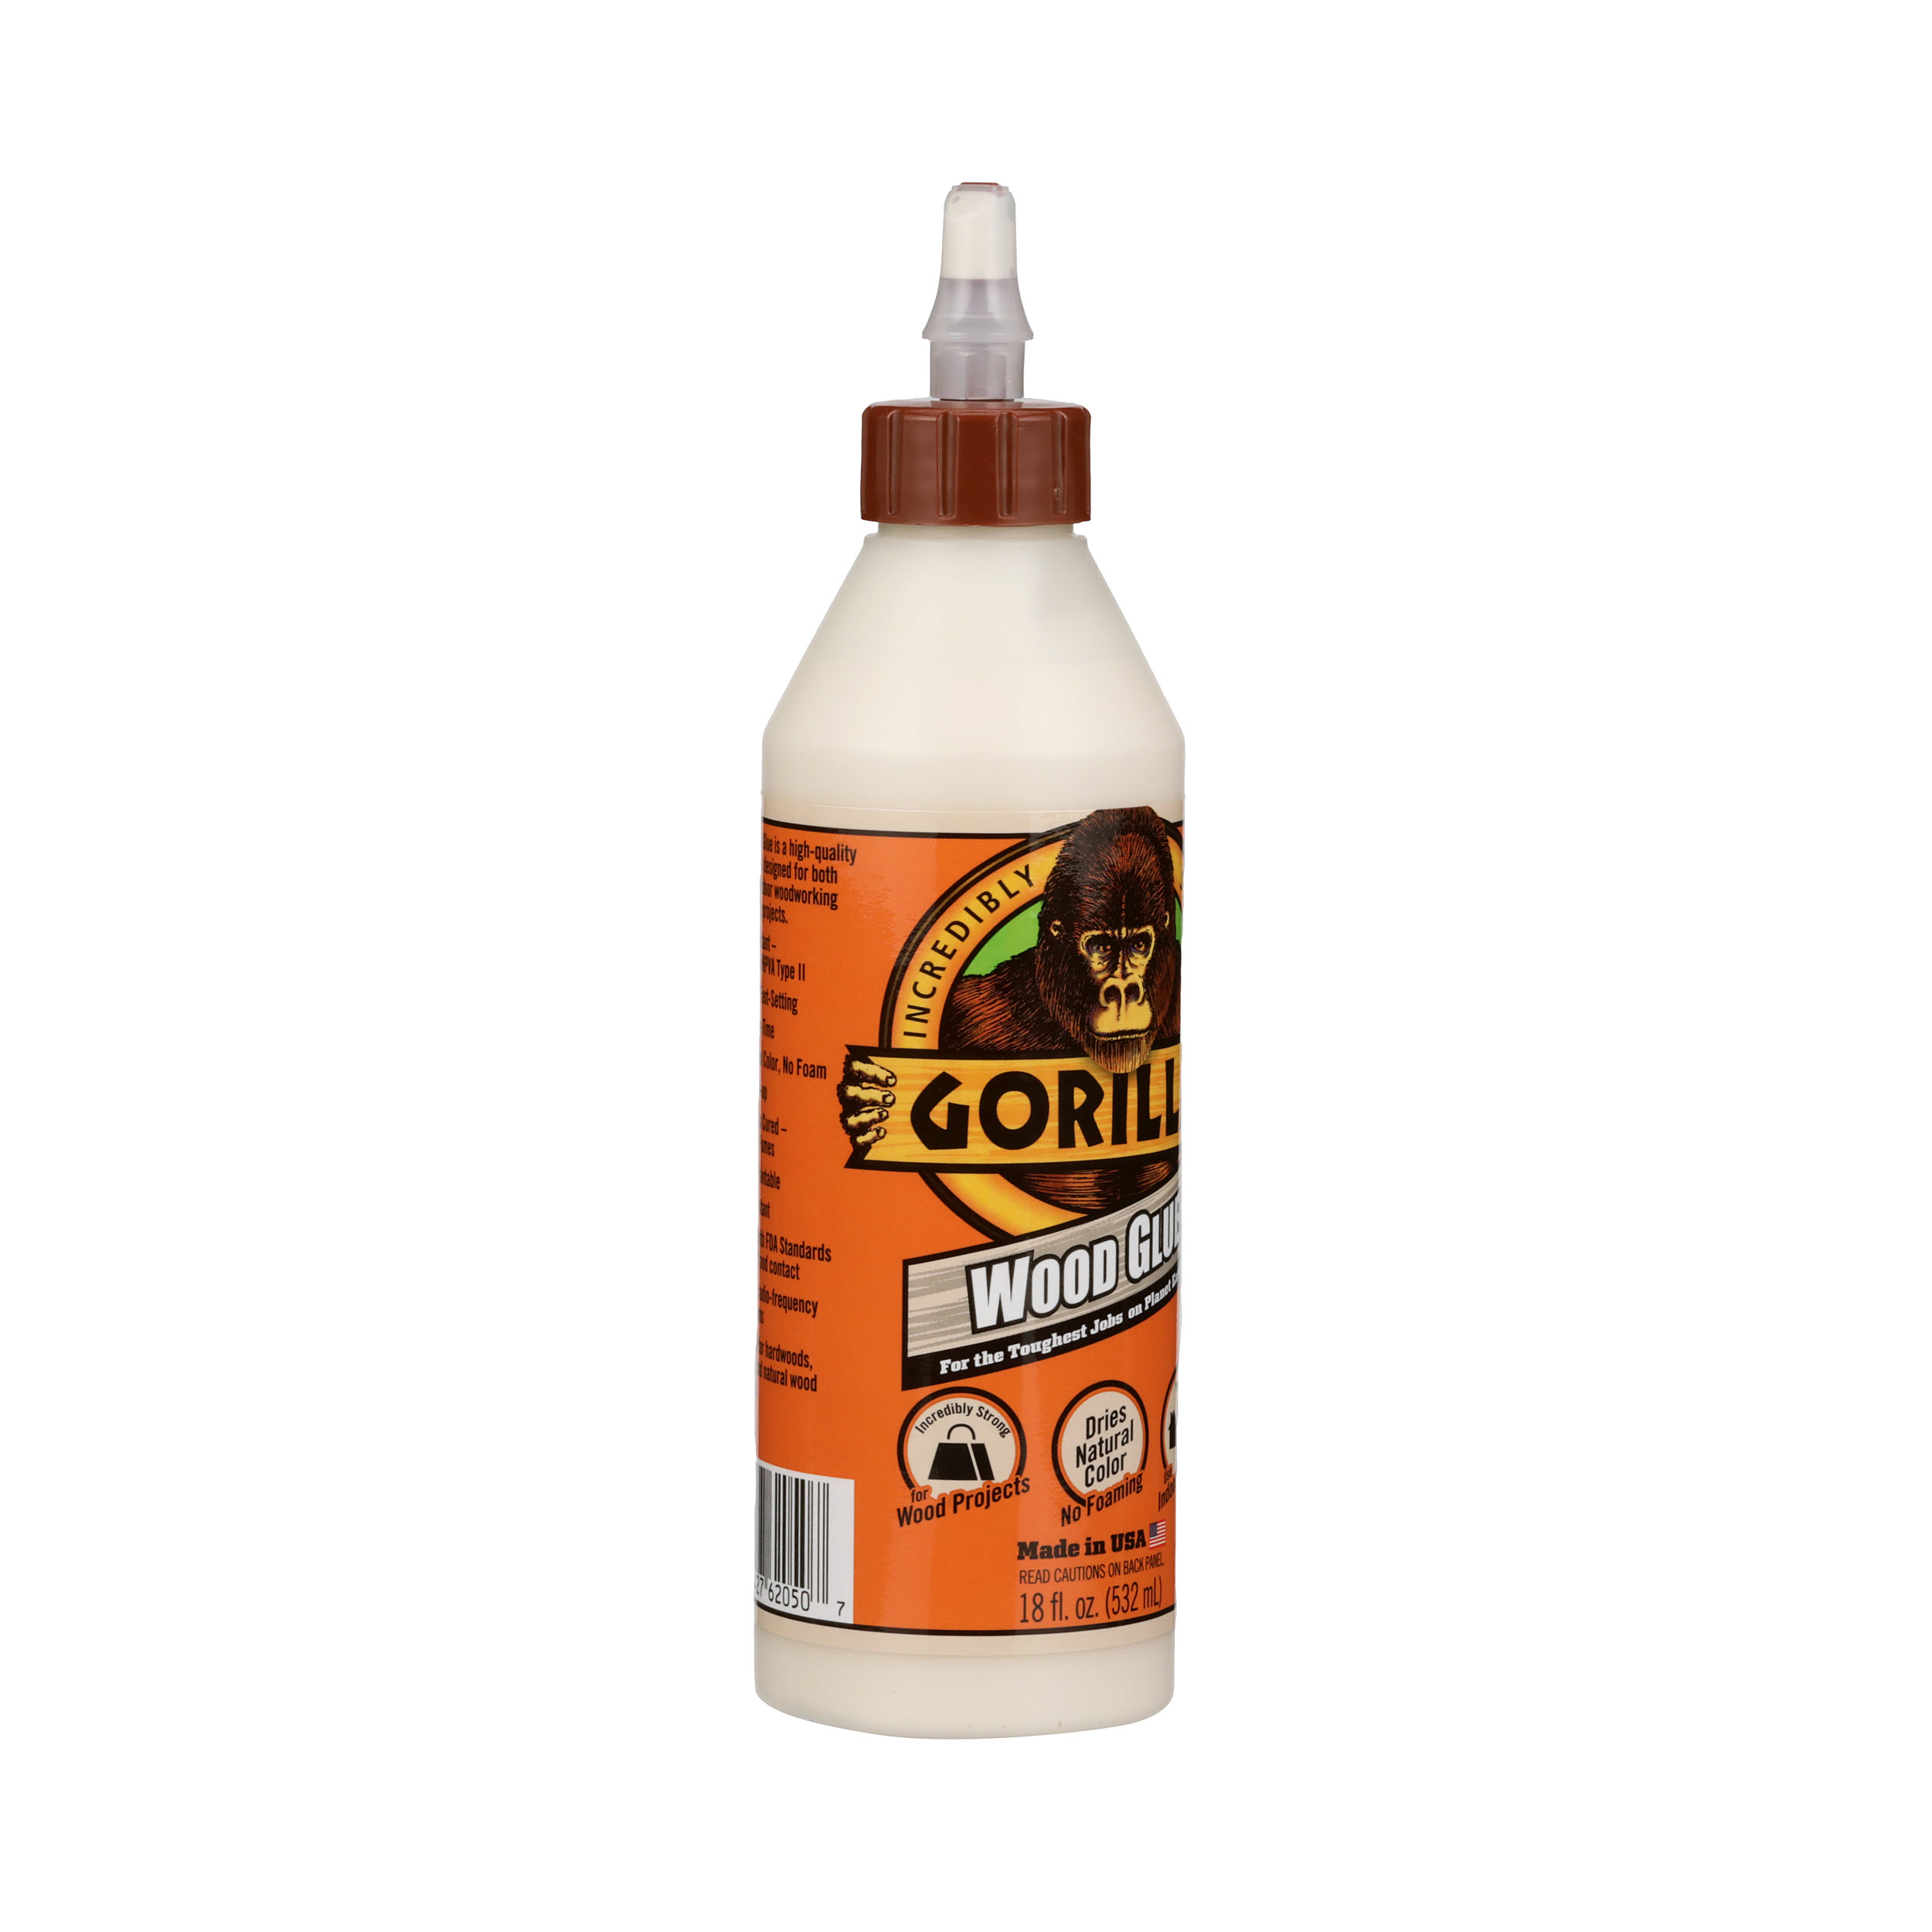 Gorilla Glue 18oz. Wood Glue. Color: White / Cream. Assembled Product  Weight Is 1.36 lb